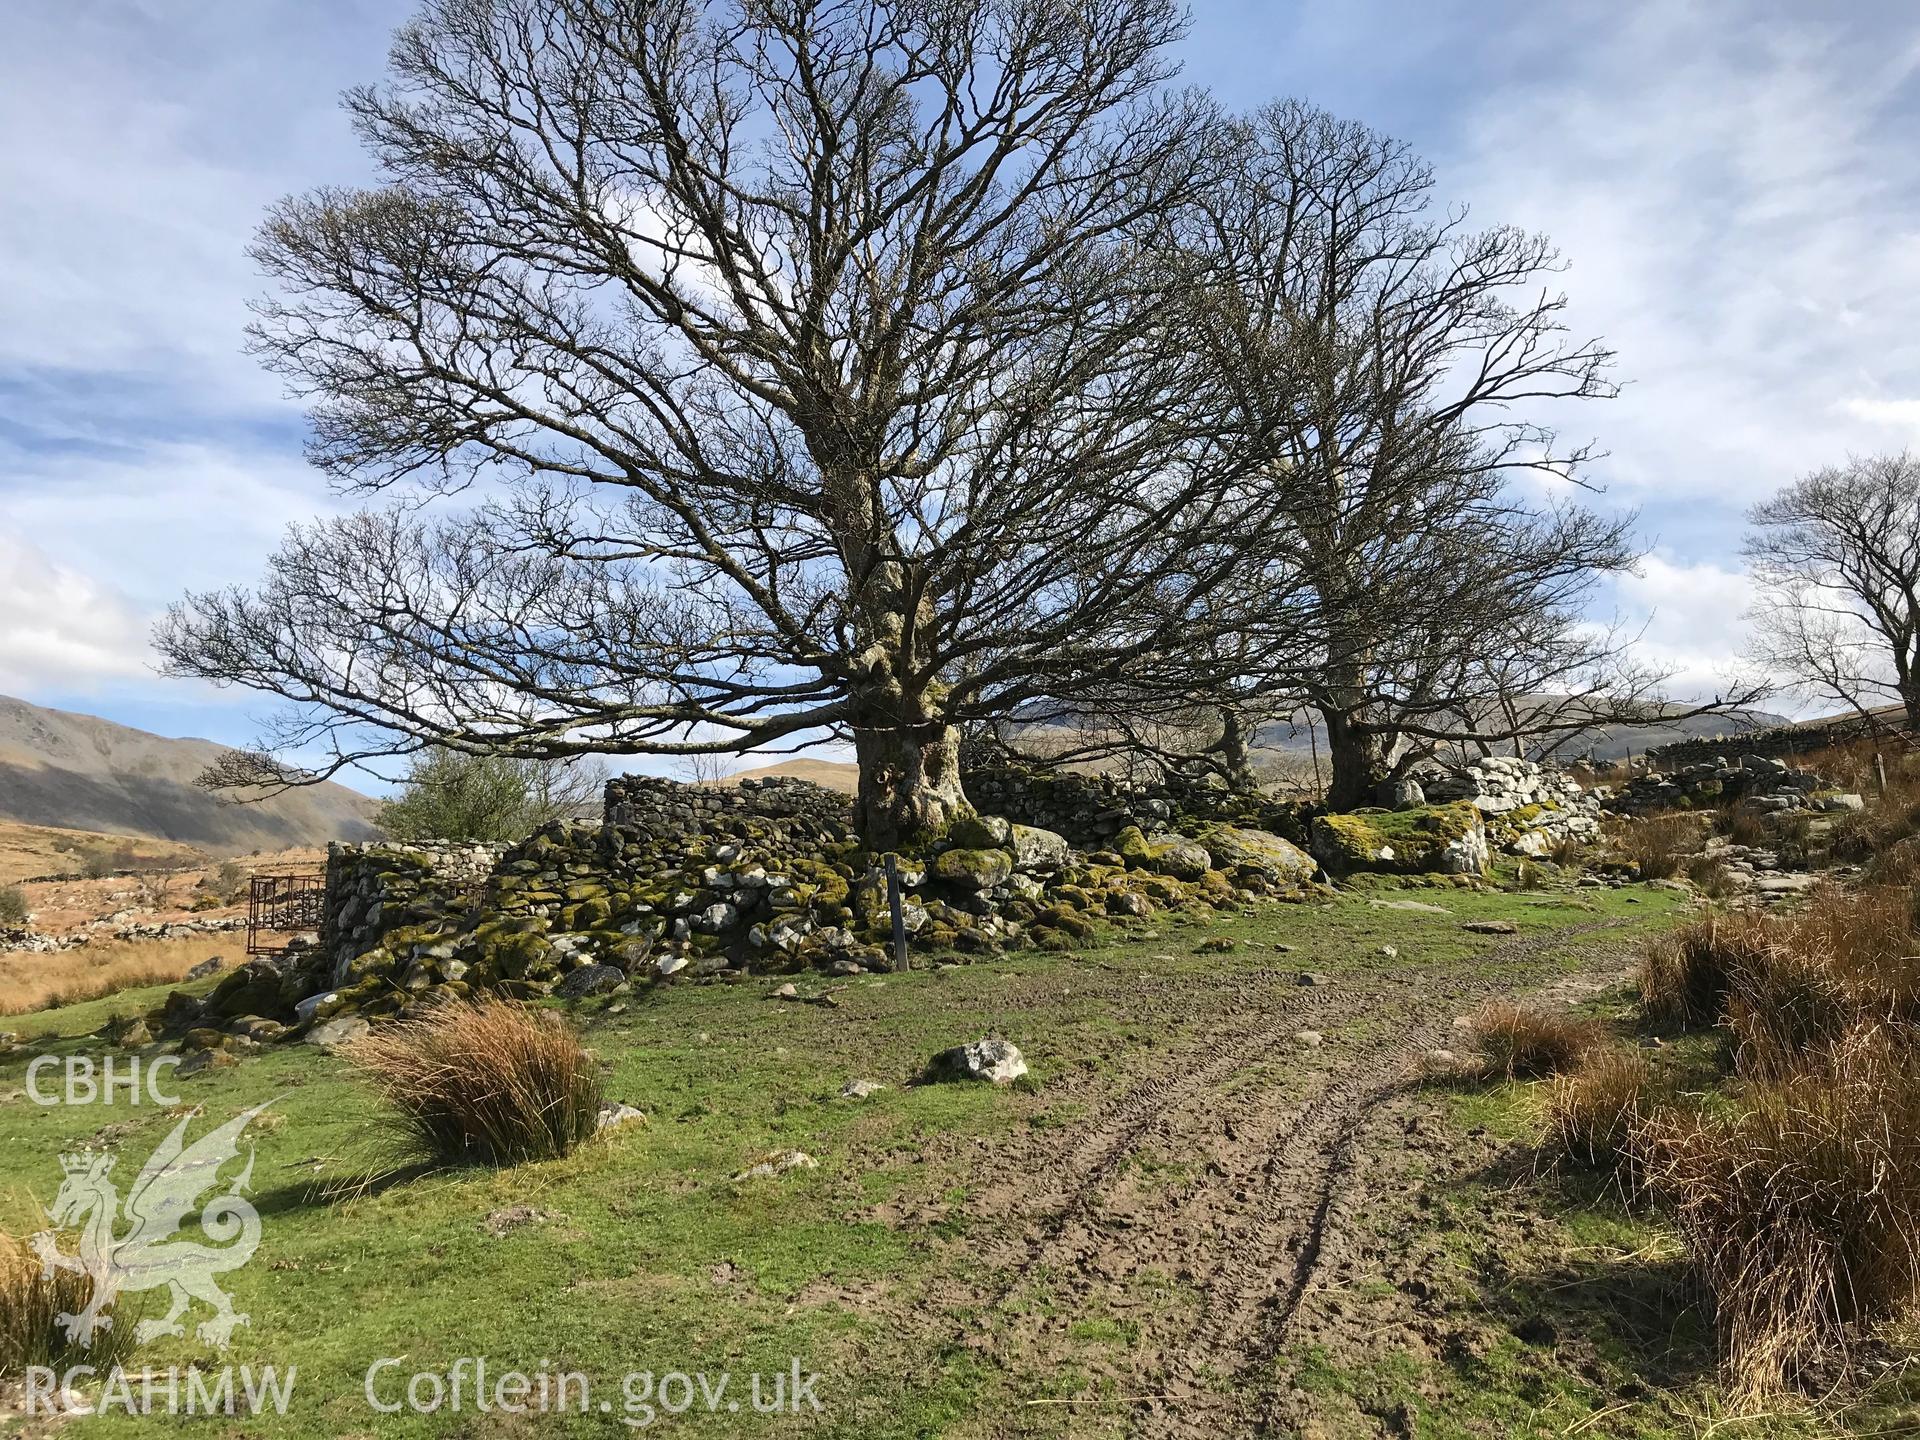 Colour photo showing view of Gwern Saeson Fawr, Bethesda, taken by Paul R. Davis, 2018.